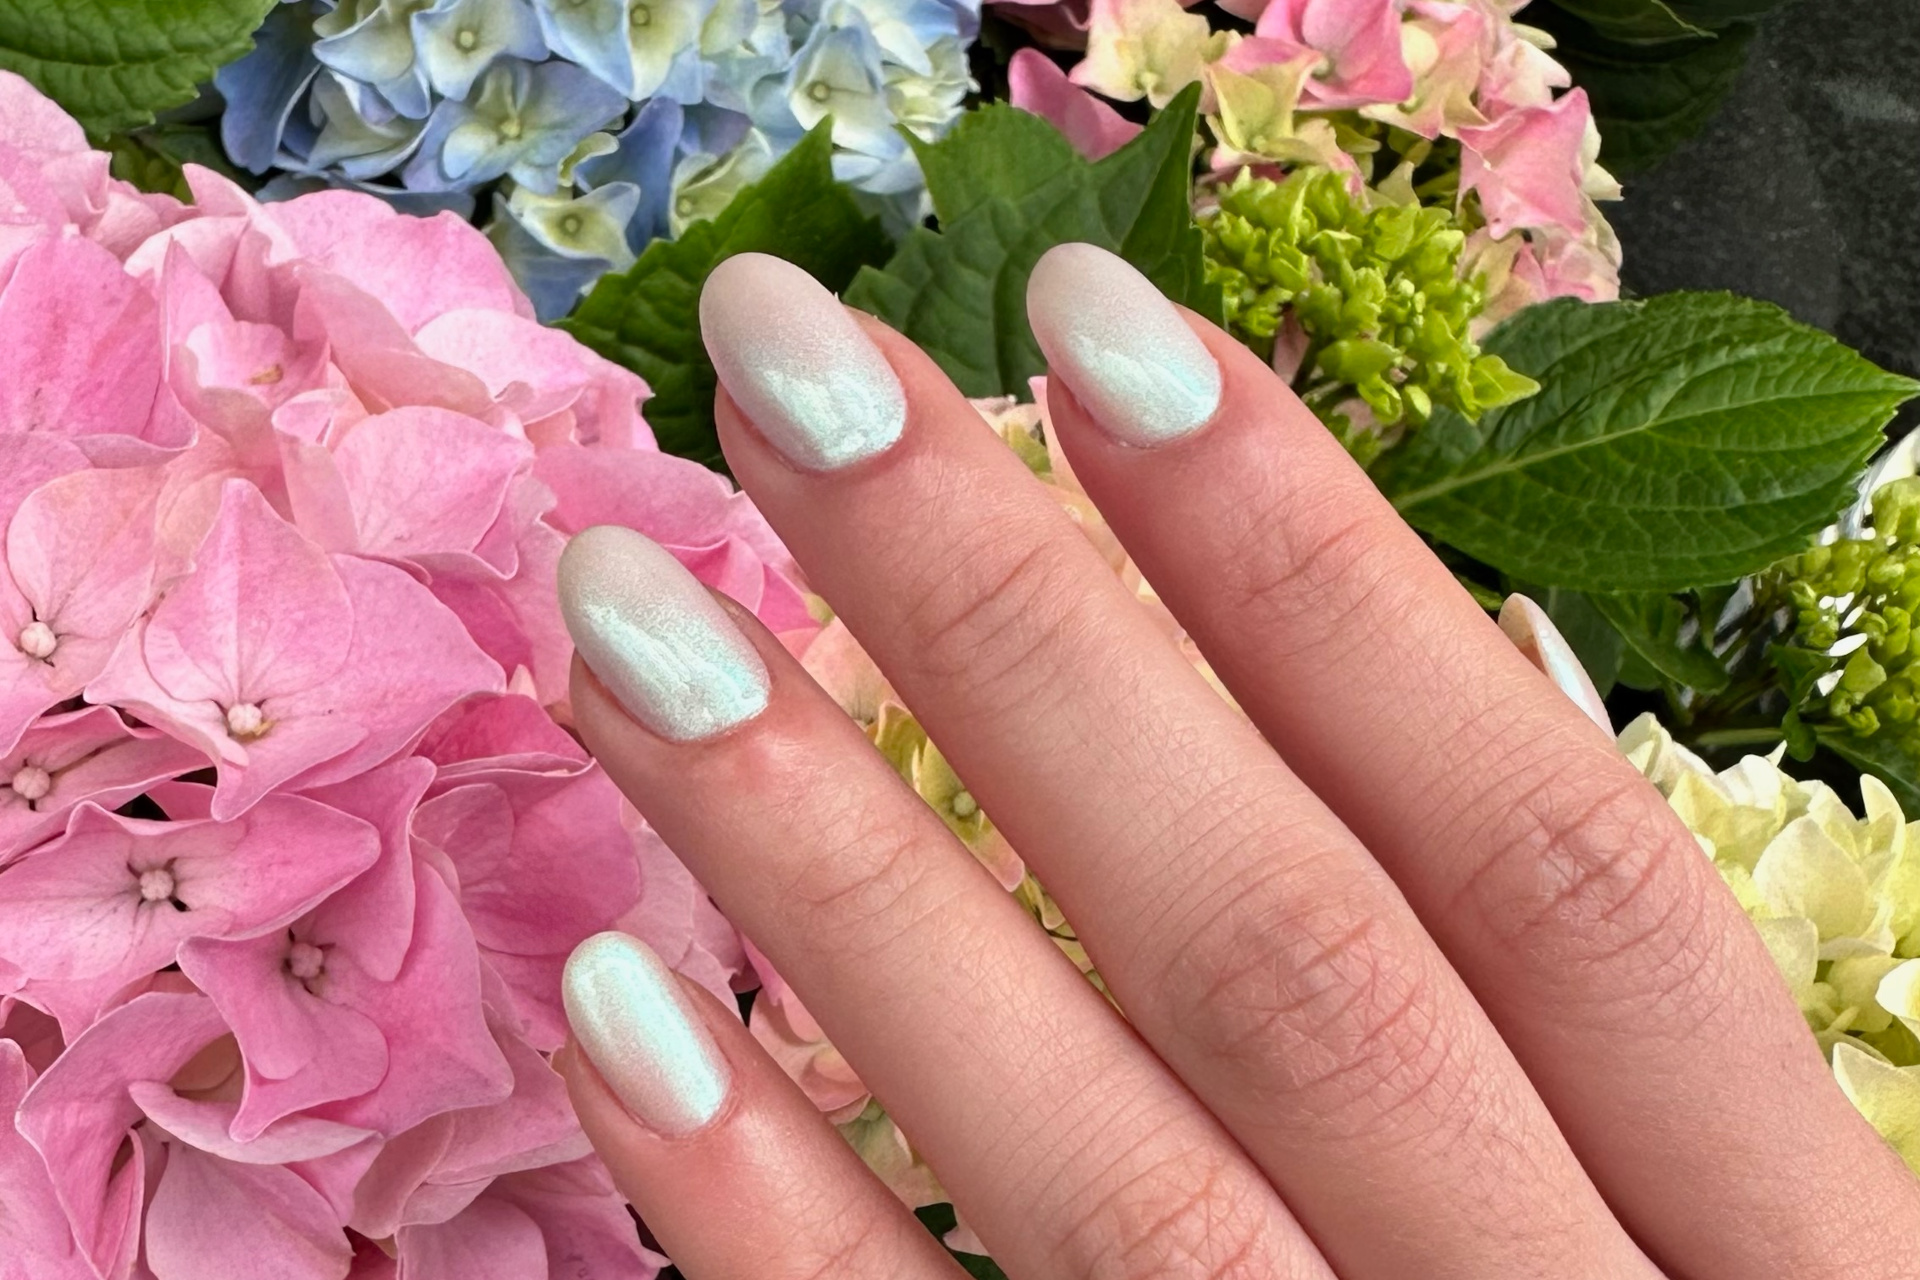 Wedding inspired nails, with hand held over flowers